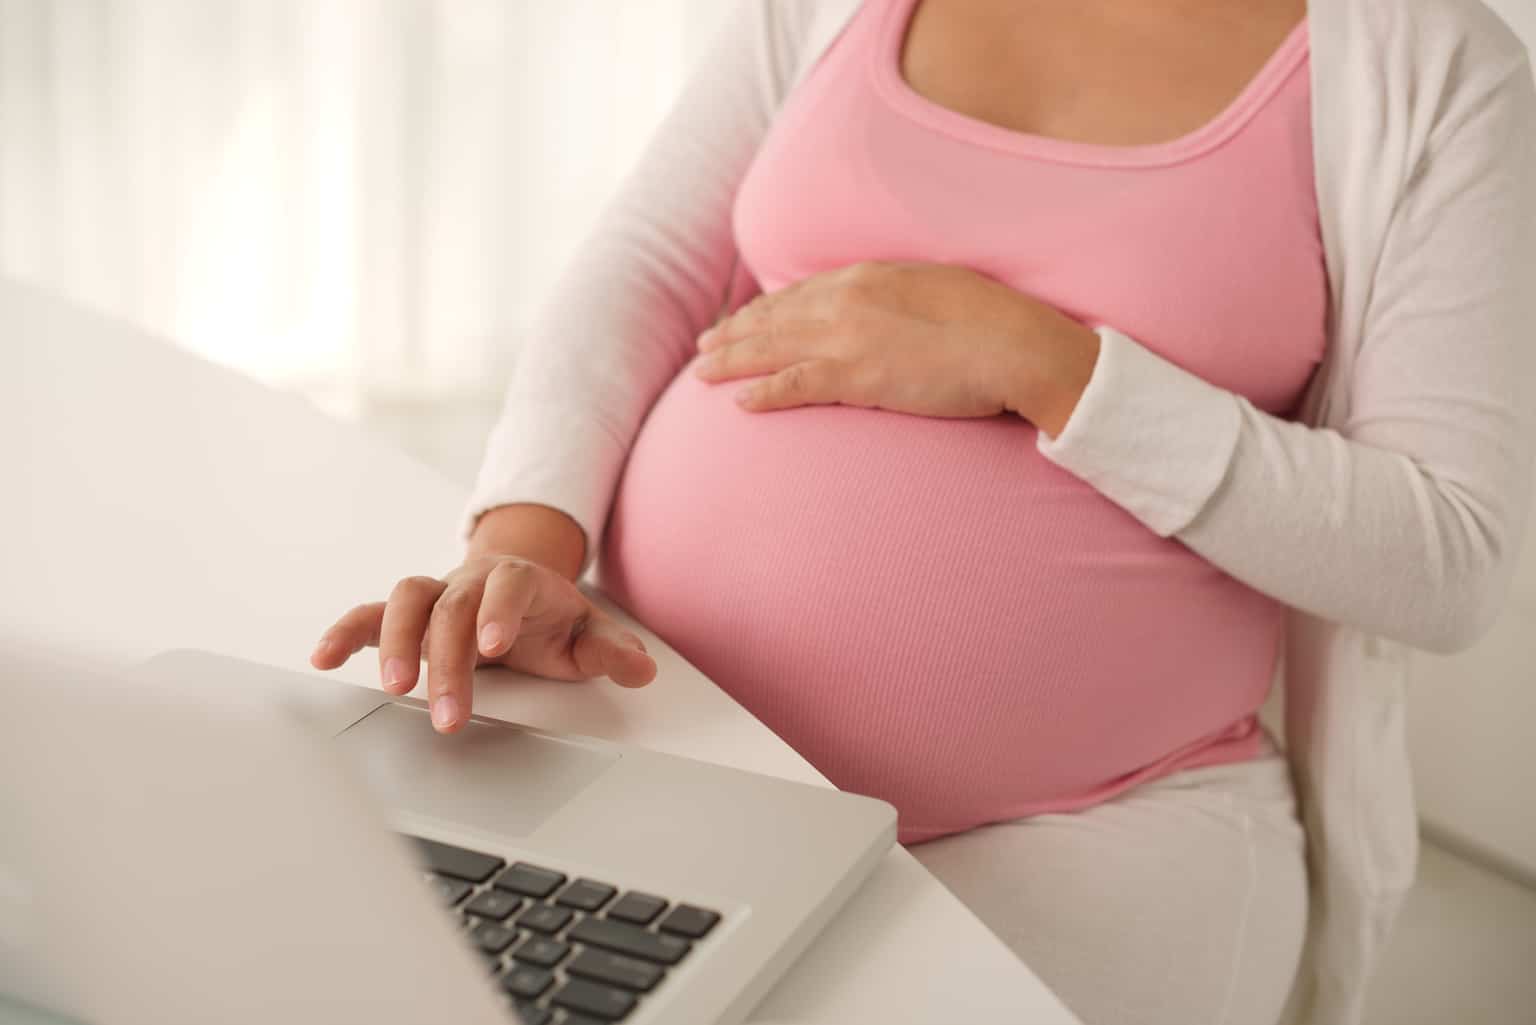 Pregnant woman working on laptop at home